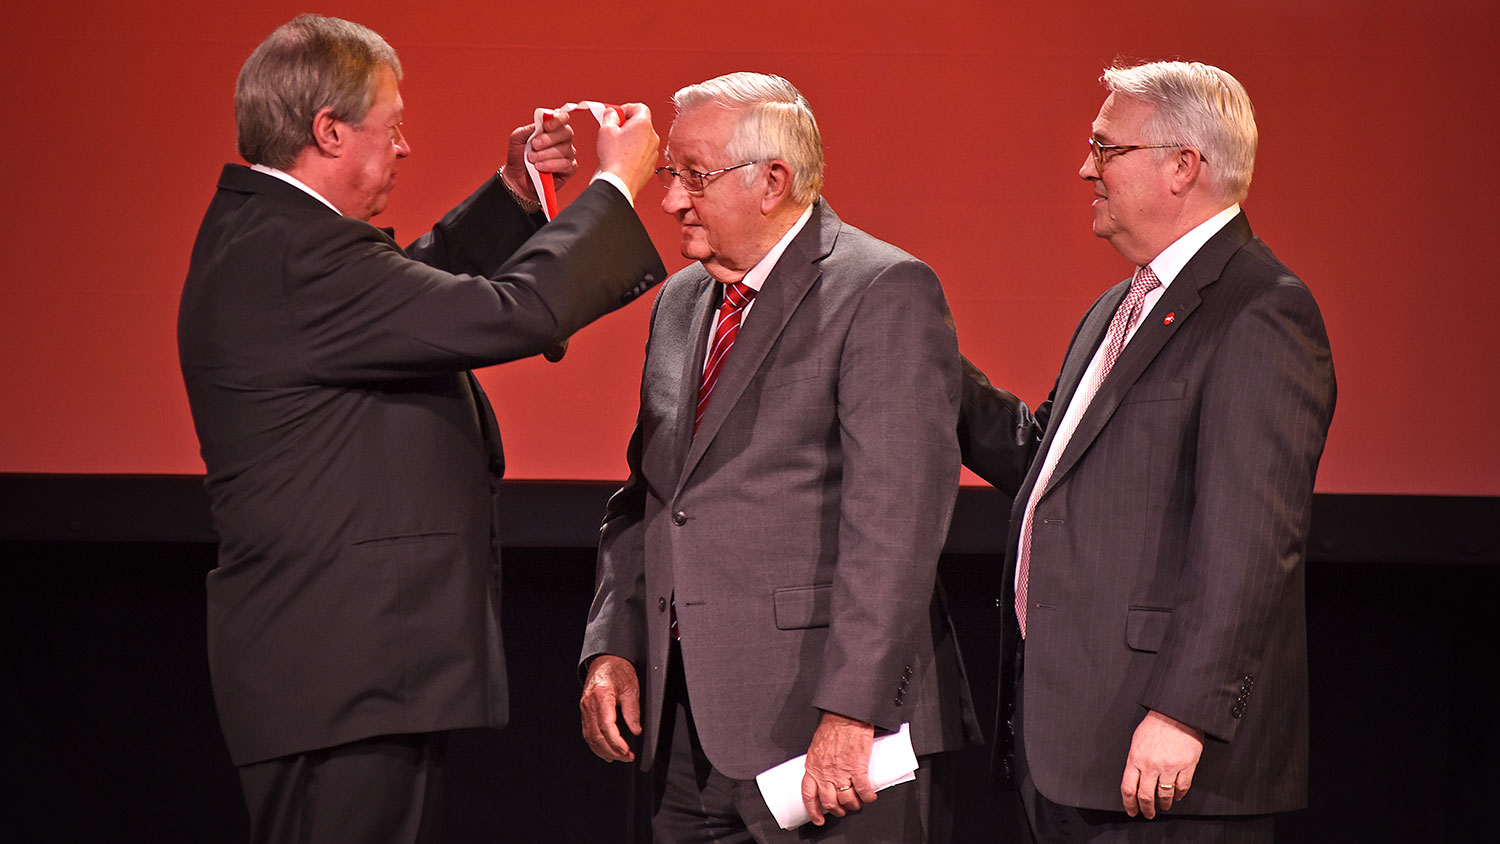 NC State Board of Trustees chair Jimmy Clark (left) places the Watauga Medal over the head of 2018 recipient Bill Collins as Chancellor Randy Woodson (right) looks on.